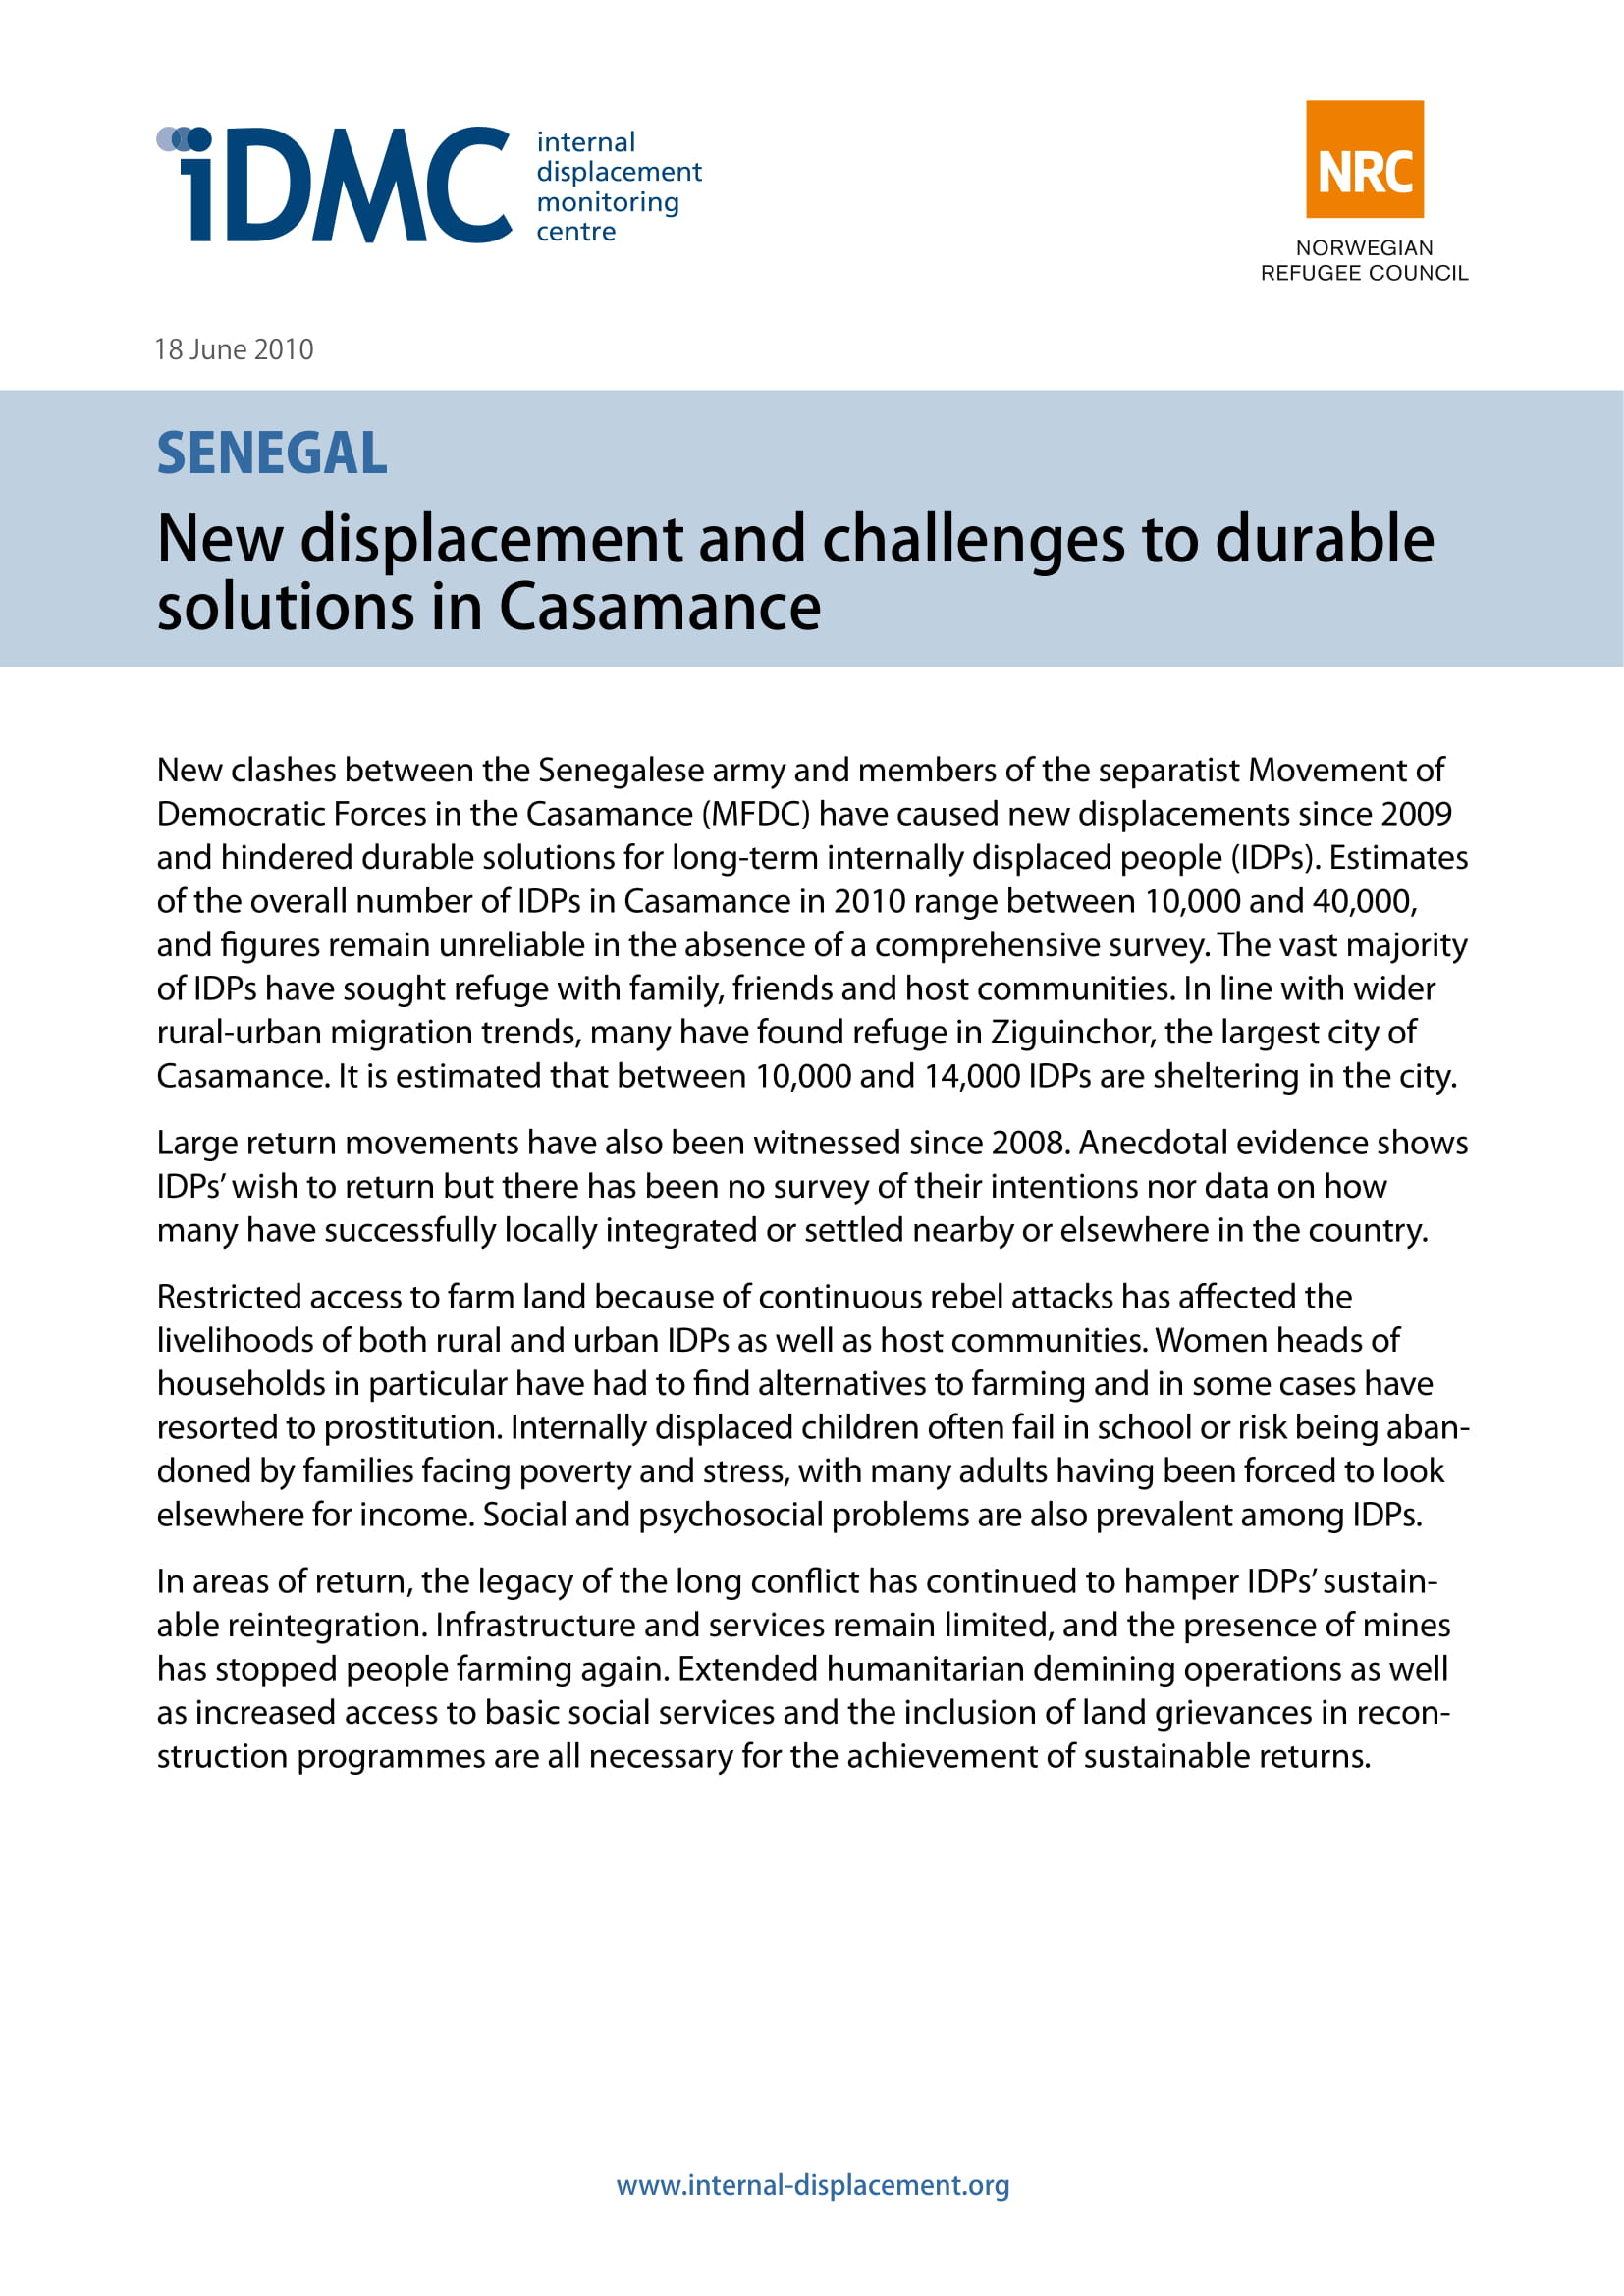 Senegal: New displacement and challenges to durable solutions in Casamance